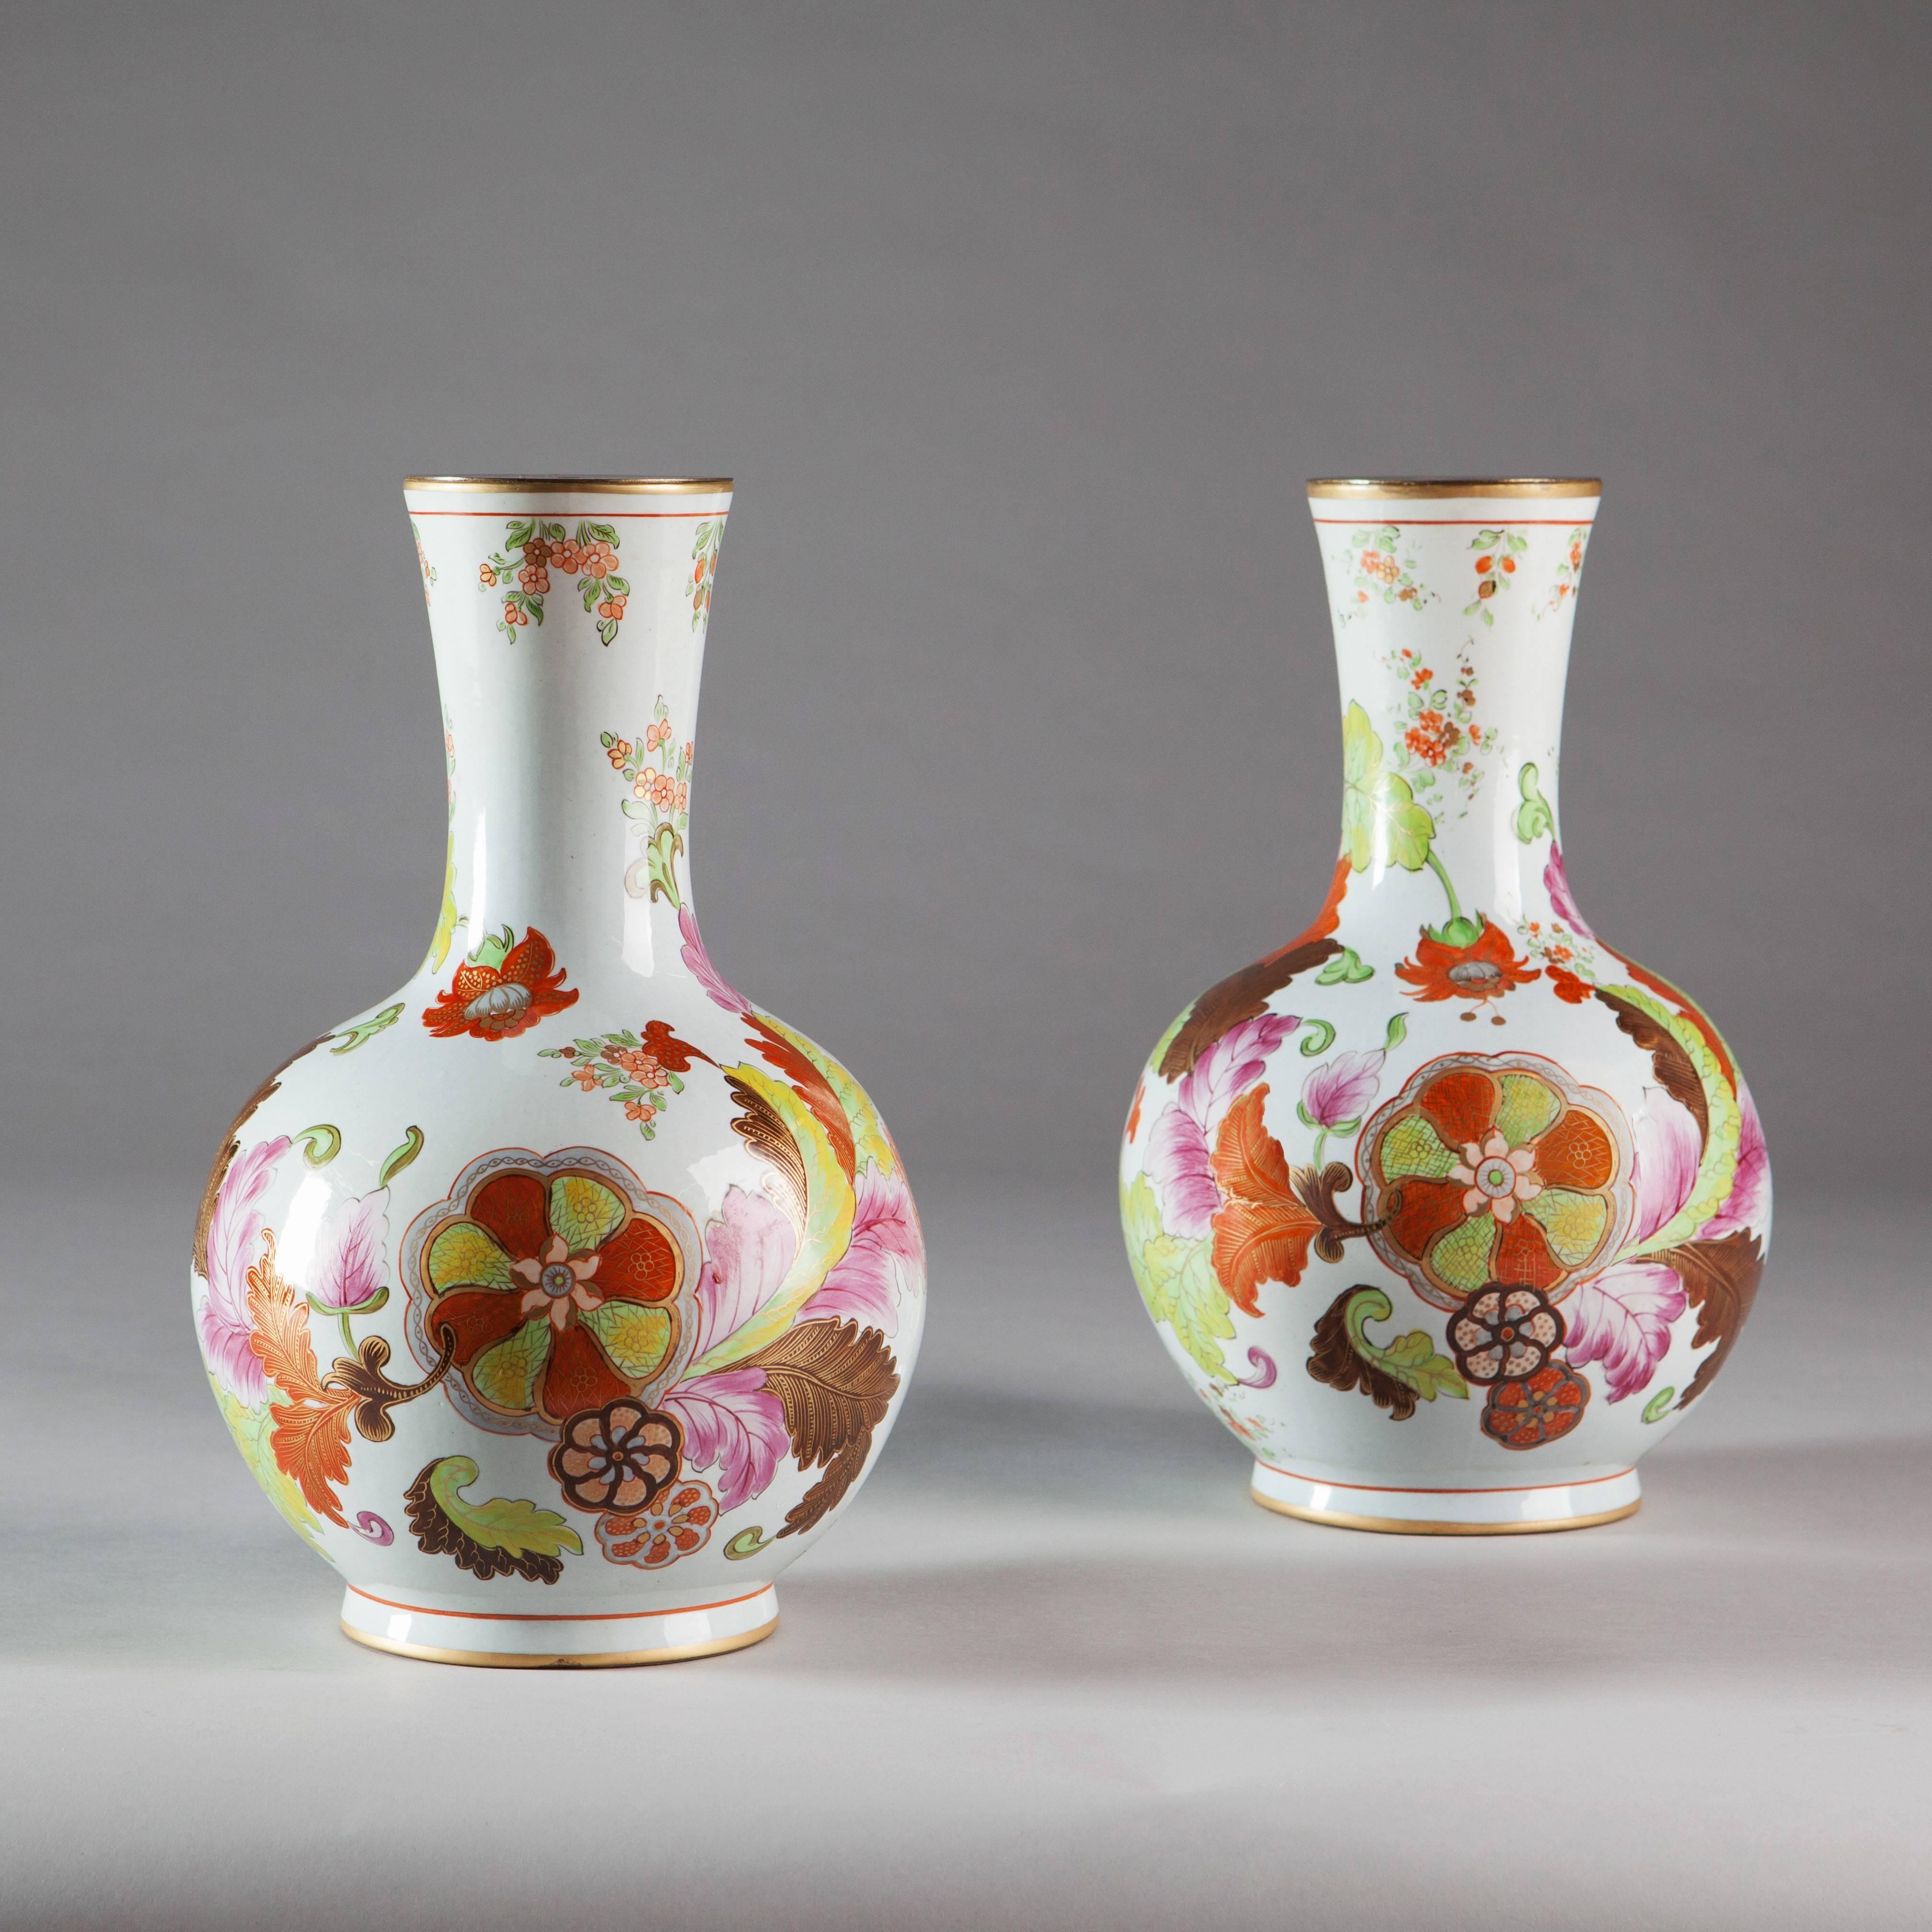 A fine pair of mid-19th century Italian tobacco leaf pattern vases.